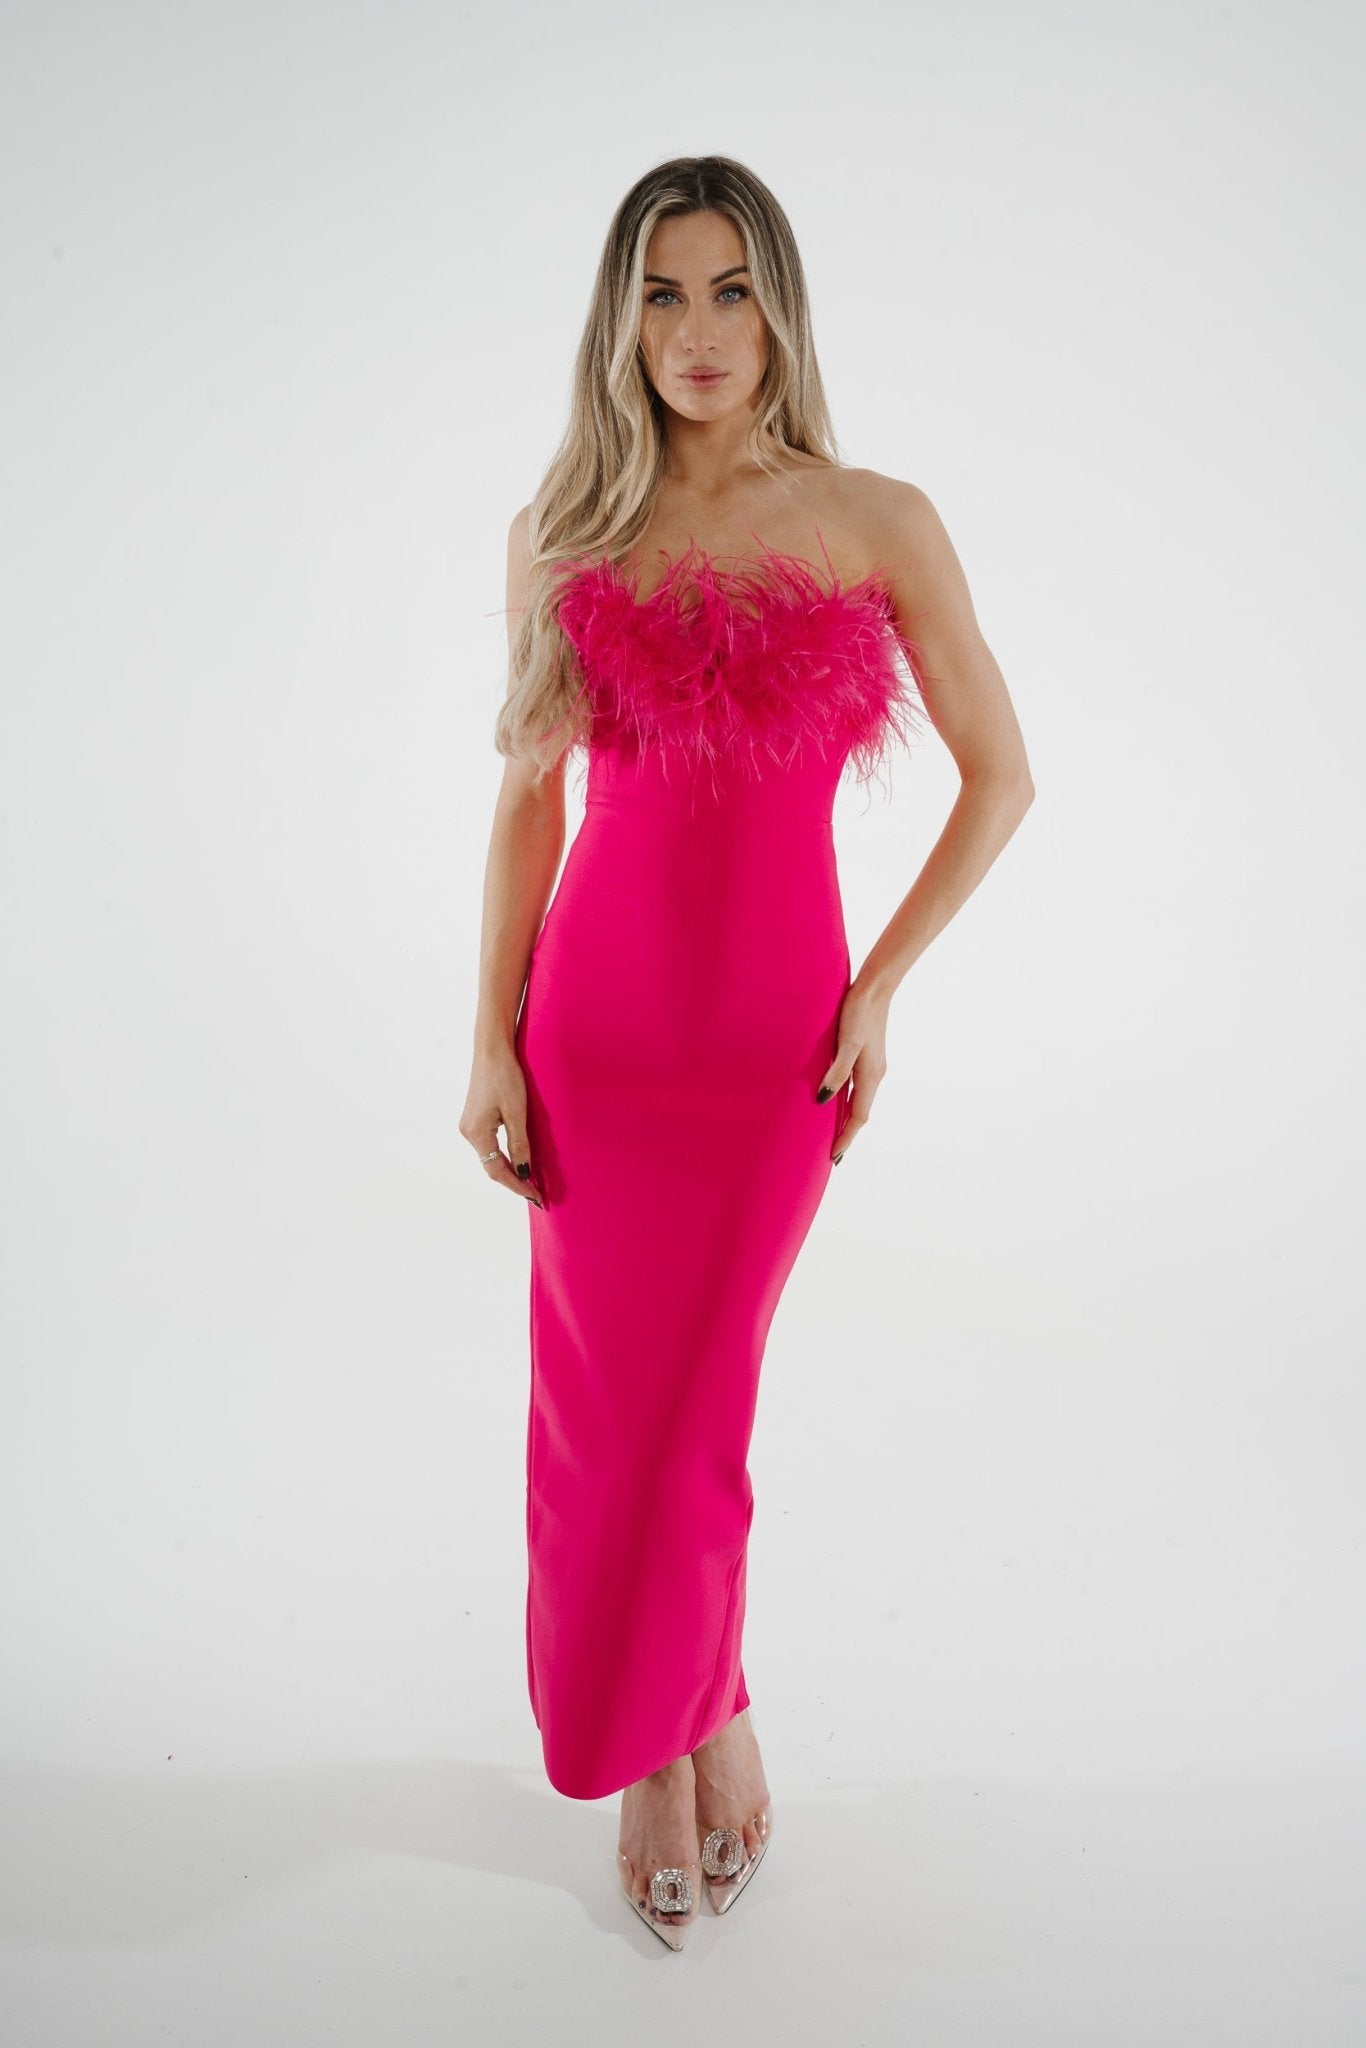 Holly Feather Bandeau Dress In Pink - The Walk in Wardrobe